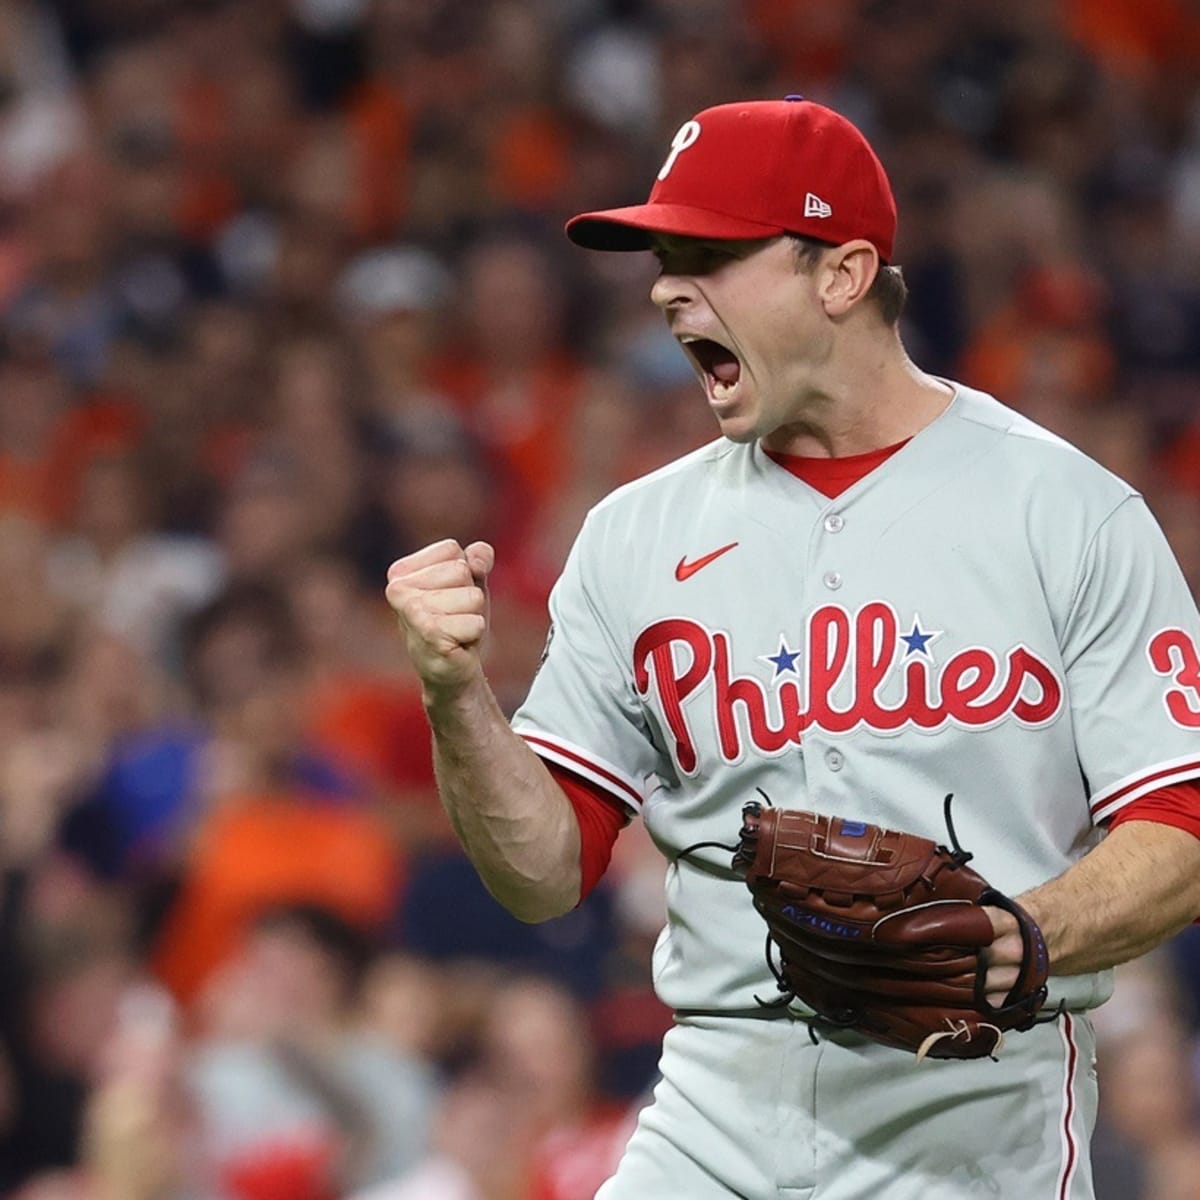 Phillies announce starting pitchers for World Series Game 1 & 2